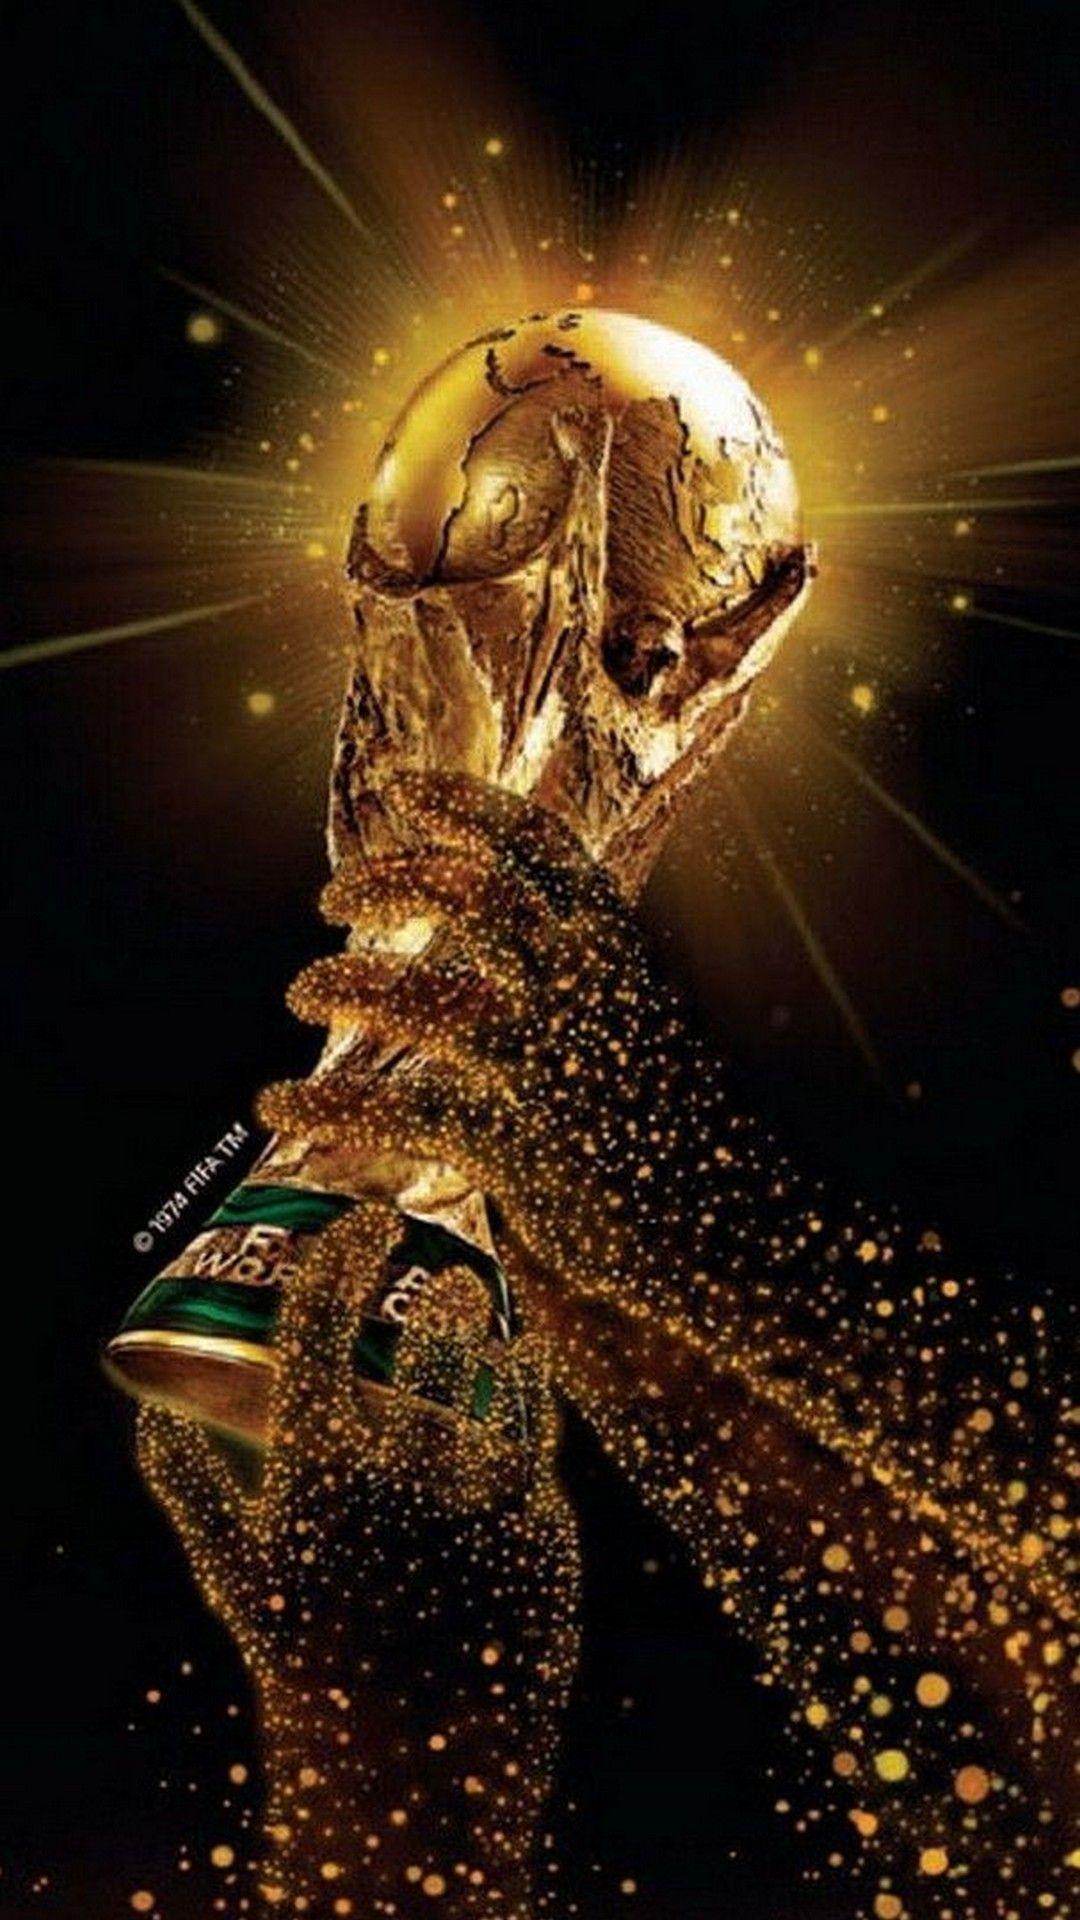 FIFA World Cup Android Wallpaper .com